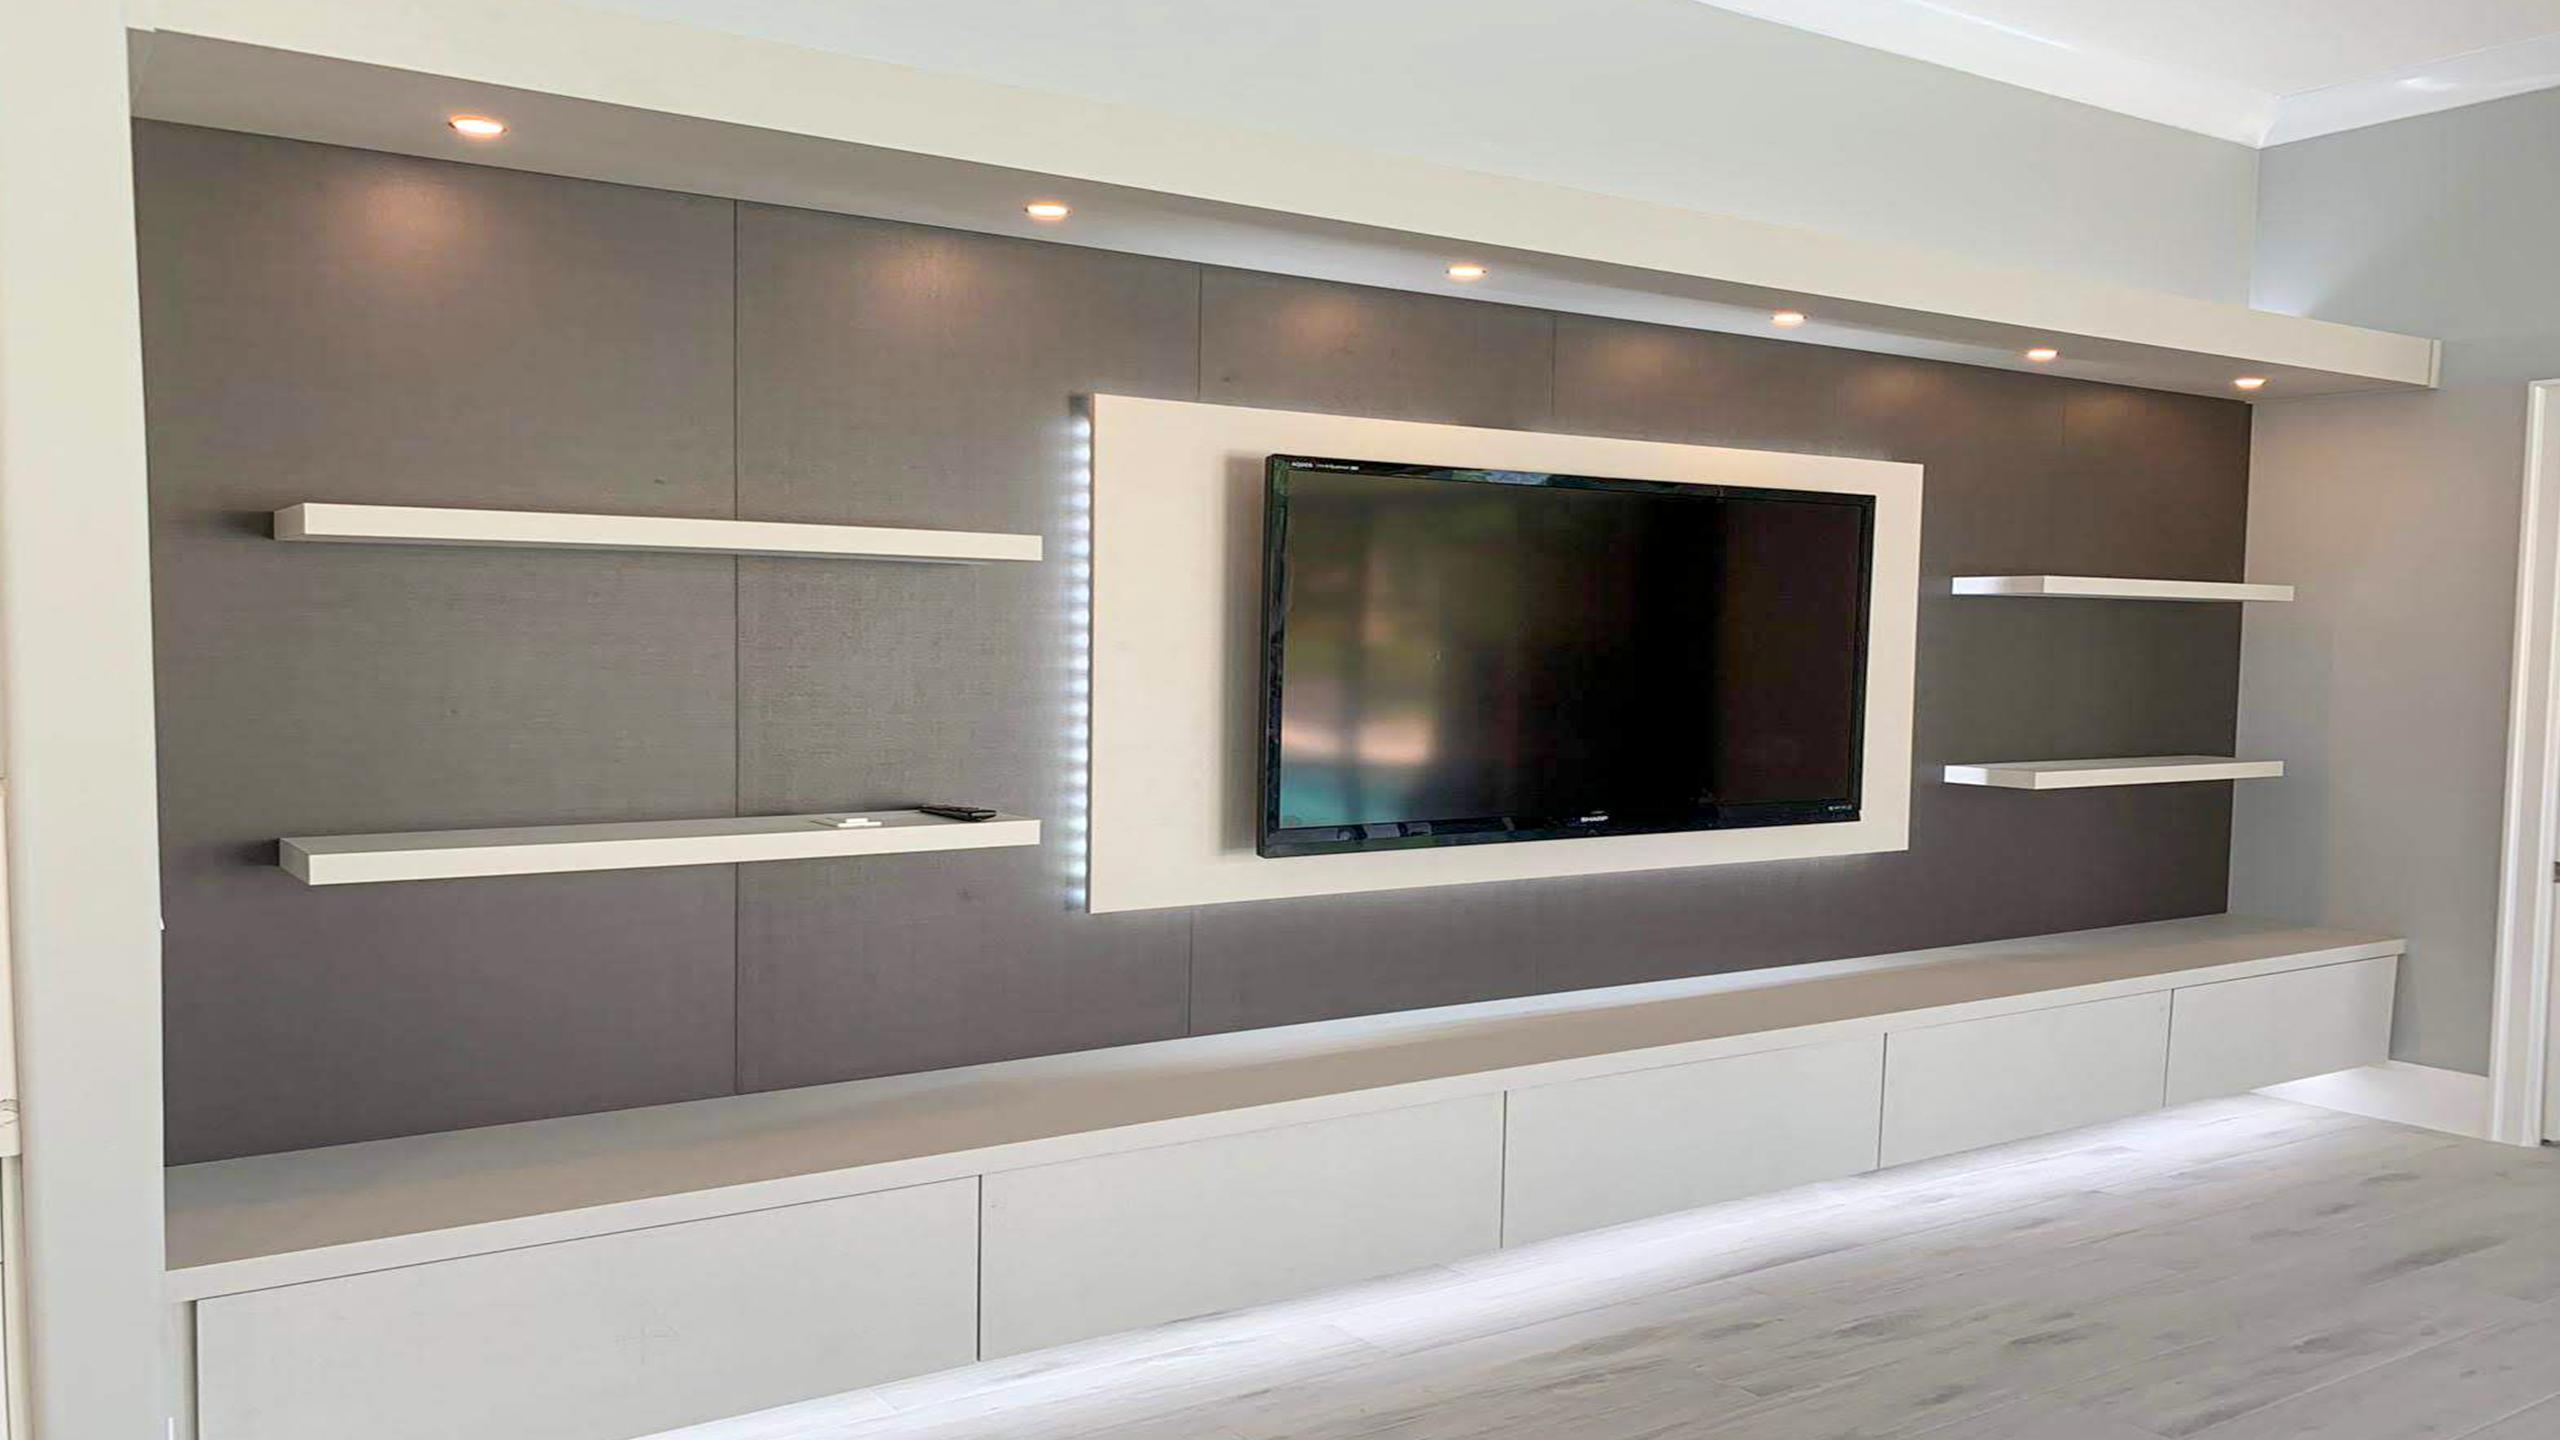 Built-In Wall Units & More, Touchwood Cabinets, Custom Cabinetry